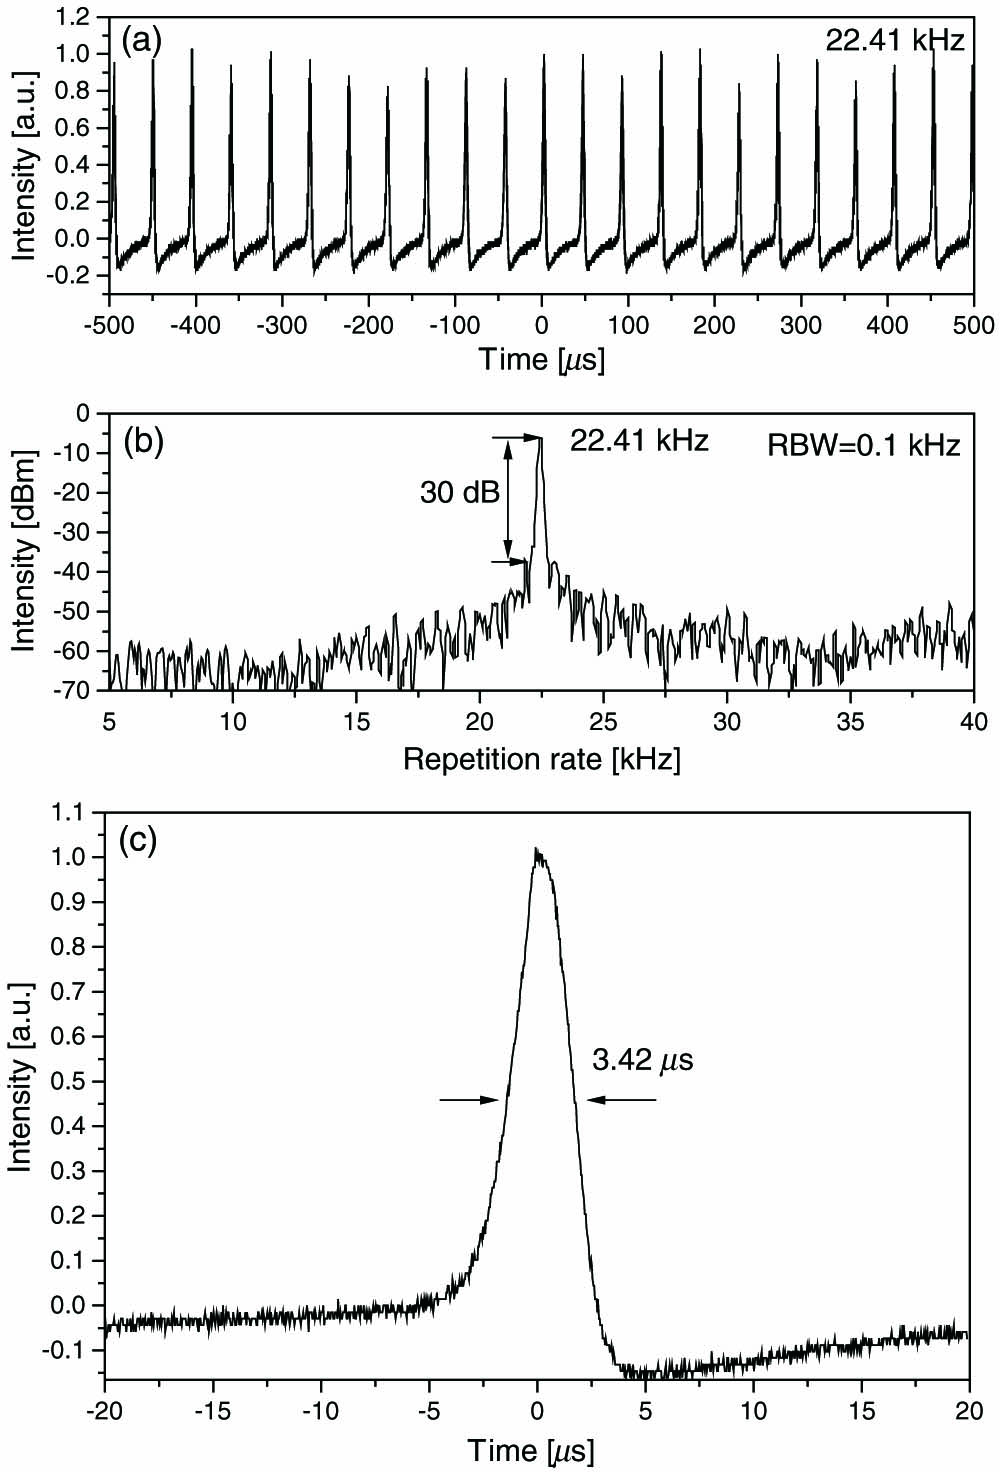 (a) Typical Q-switched pulse train in 1 ms time scale. (b) RF spectrum with an SNR of 30 dB measured by a resolution bandwidth (RBW) of 0.1 kHz. (c) Q-switched pulse profile with a pulse duration of 3.42 μs.